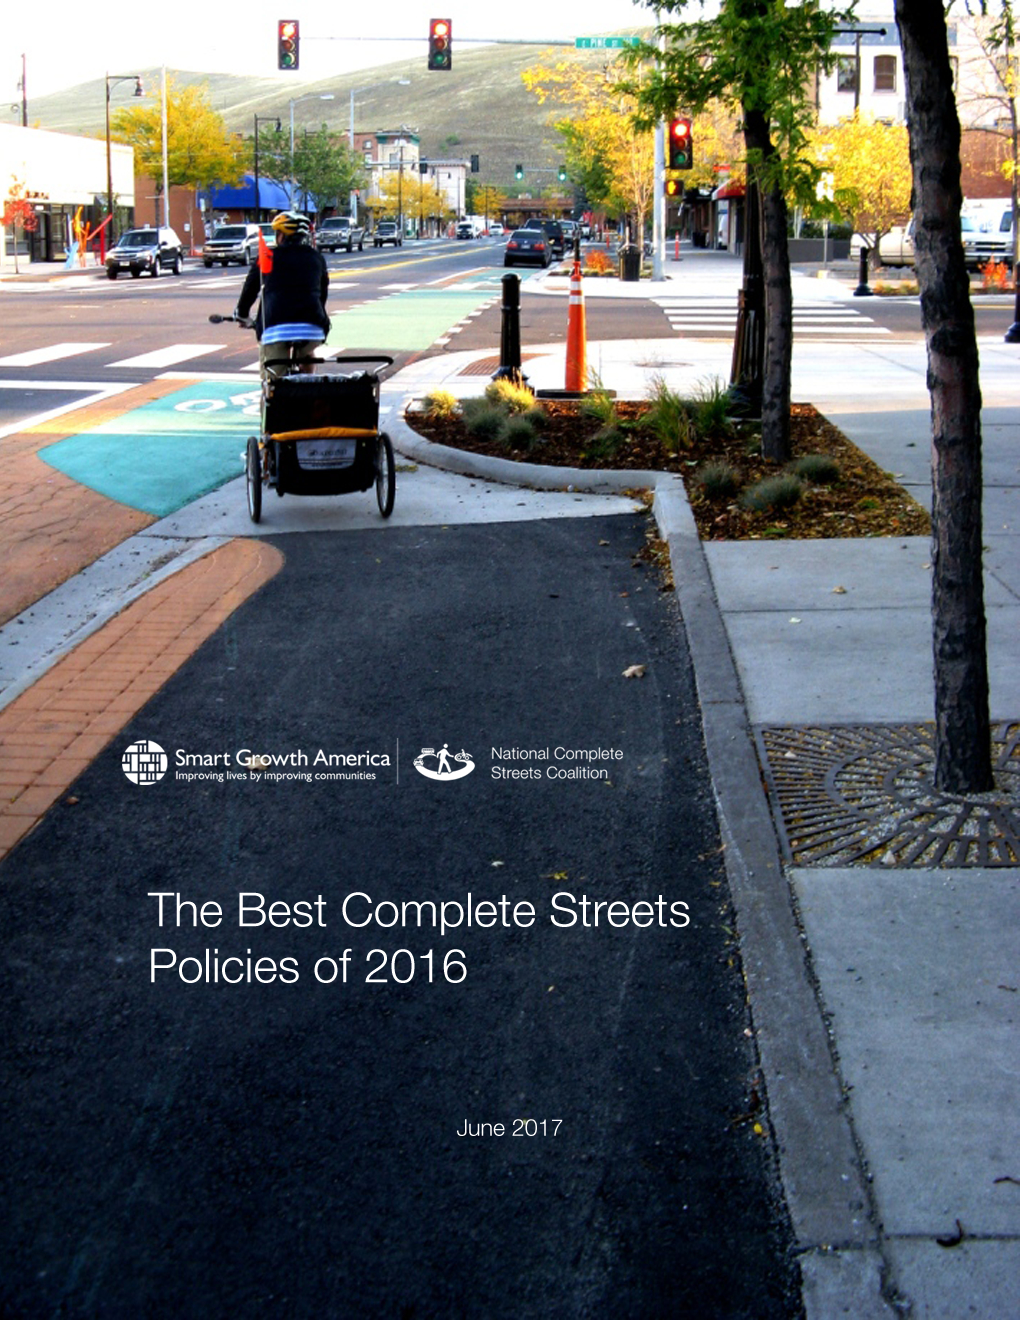 Announcing the Best Complete Streets Policies of 2016